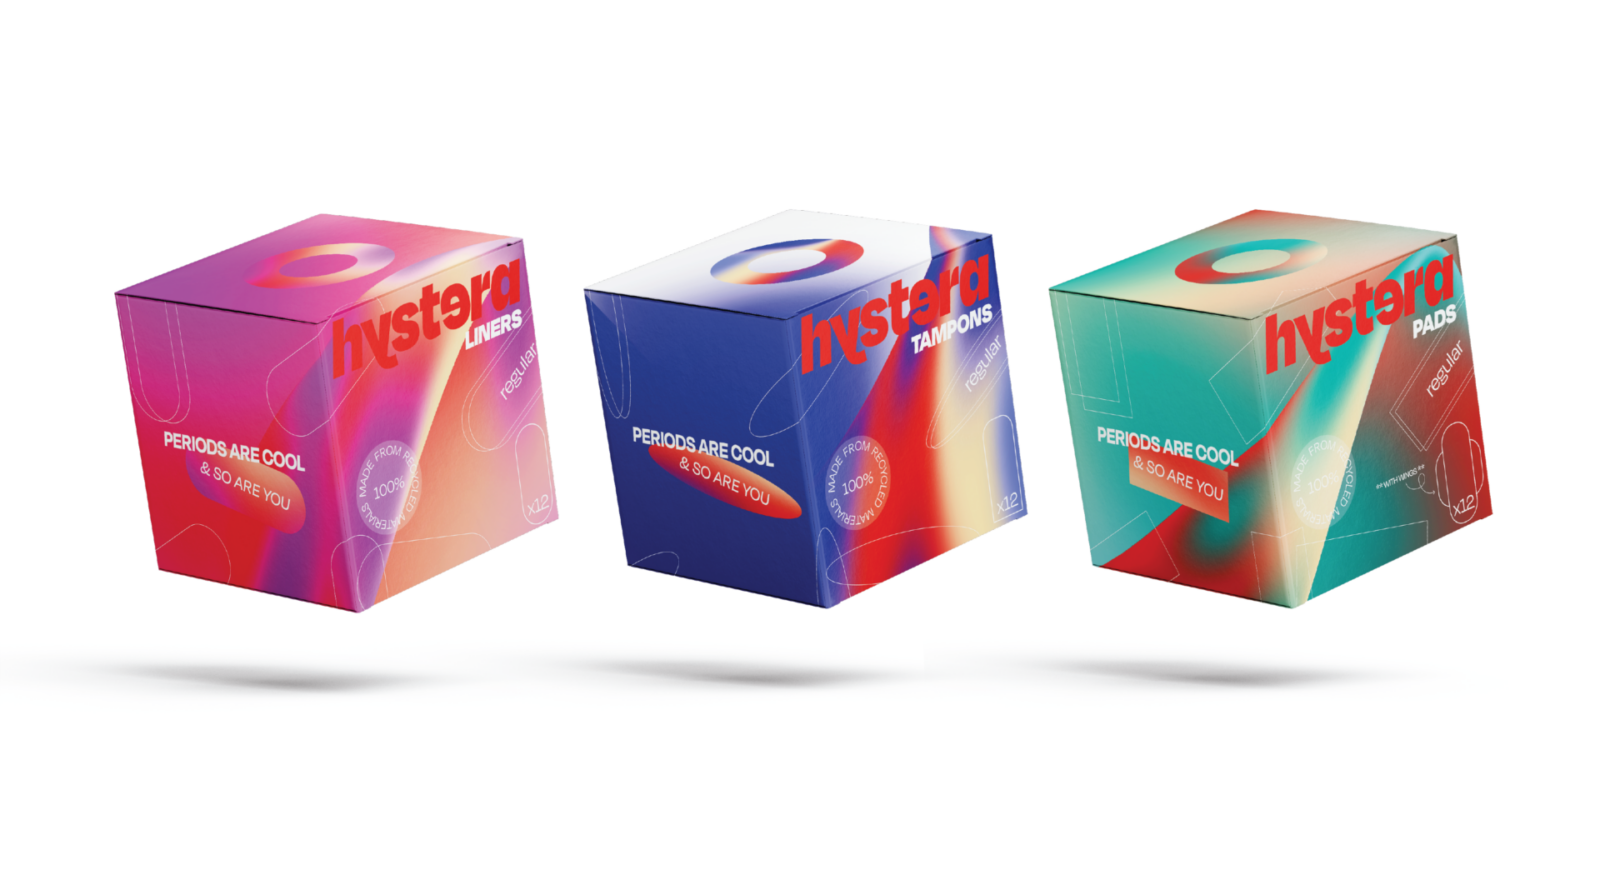 Hystera packaging: Liners, tampons and pads